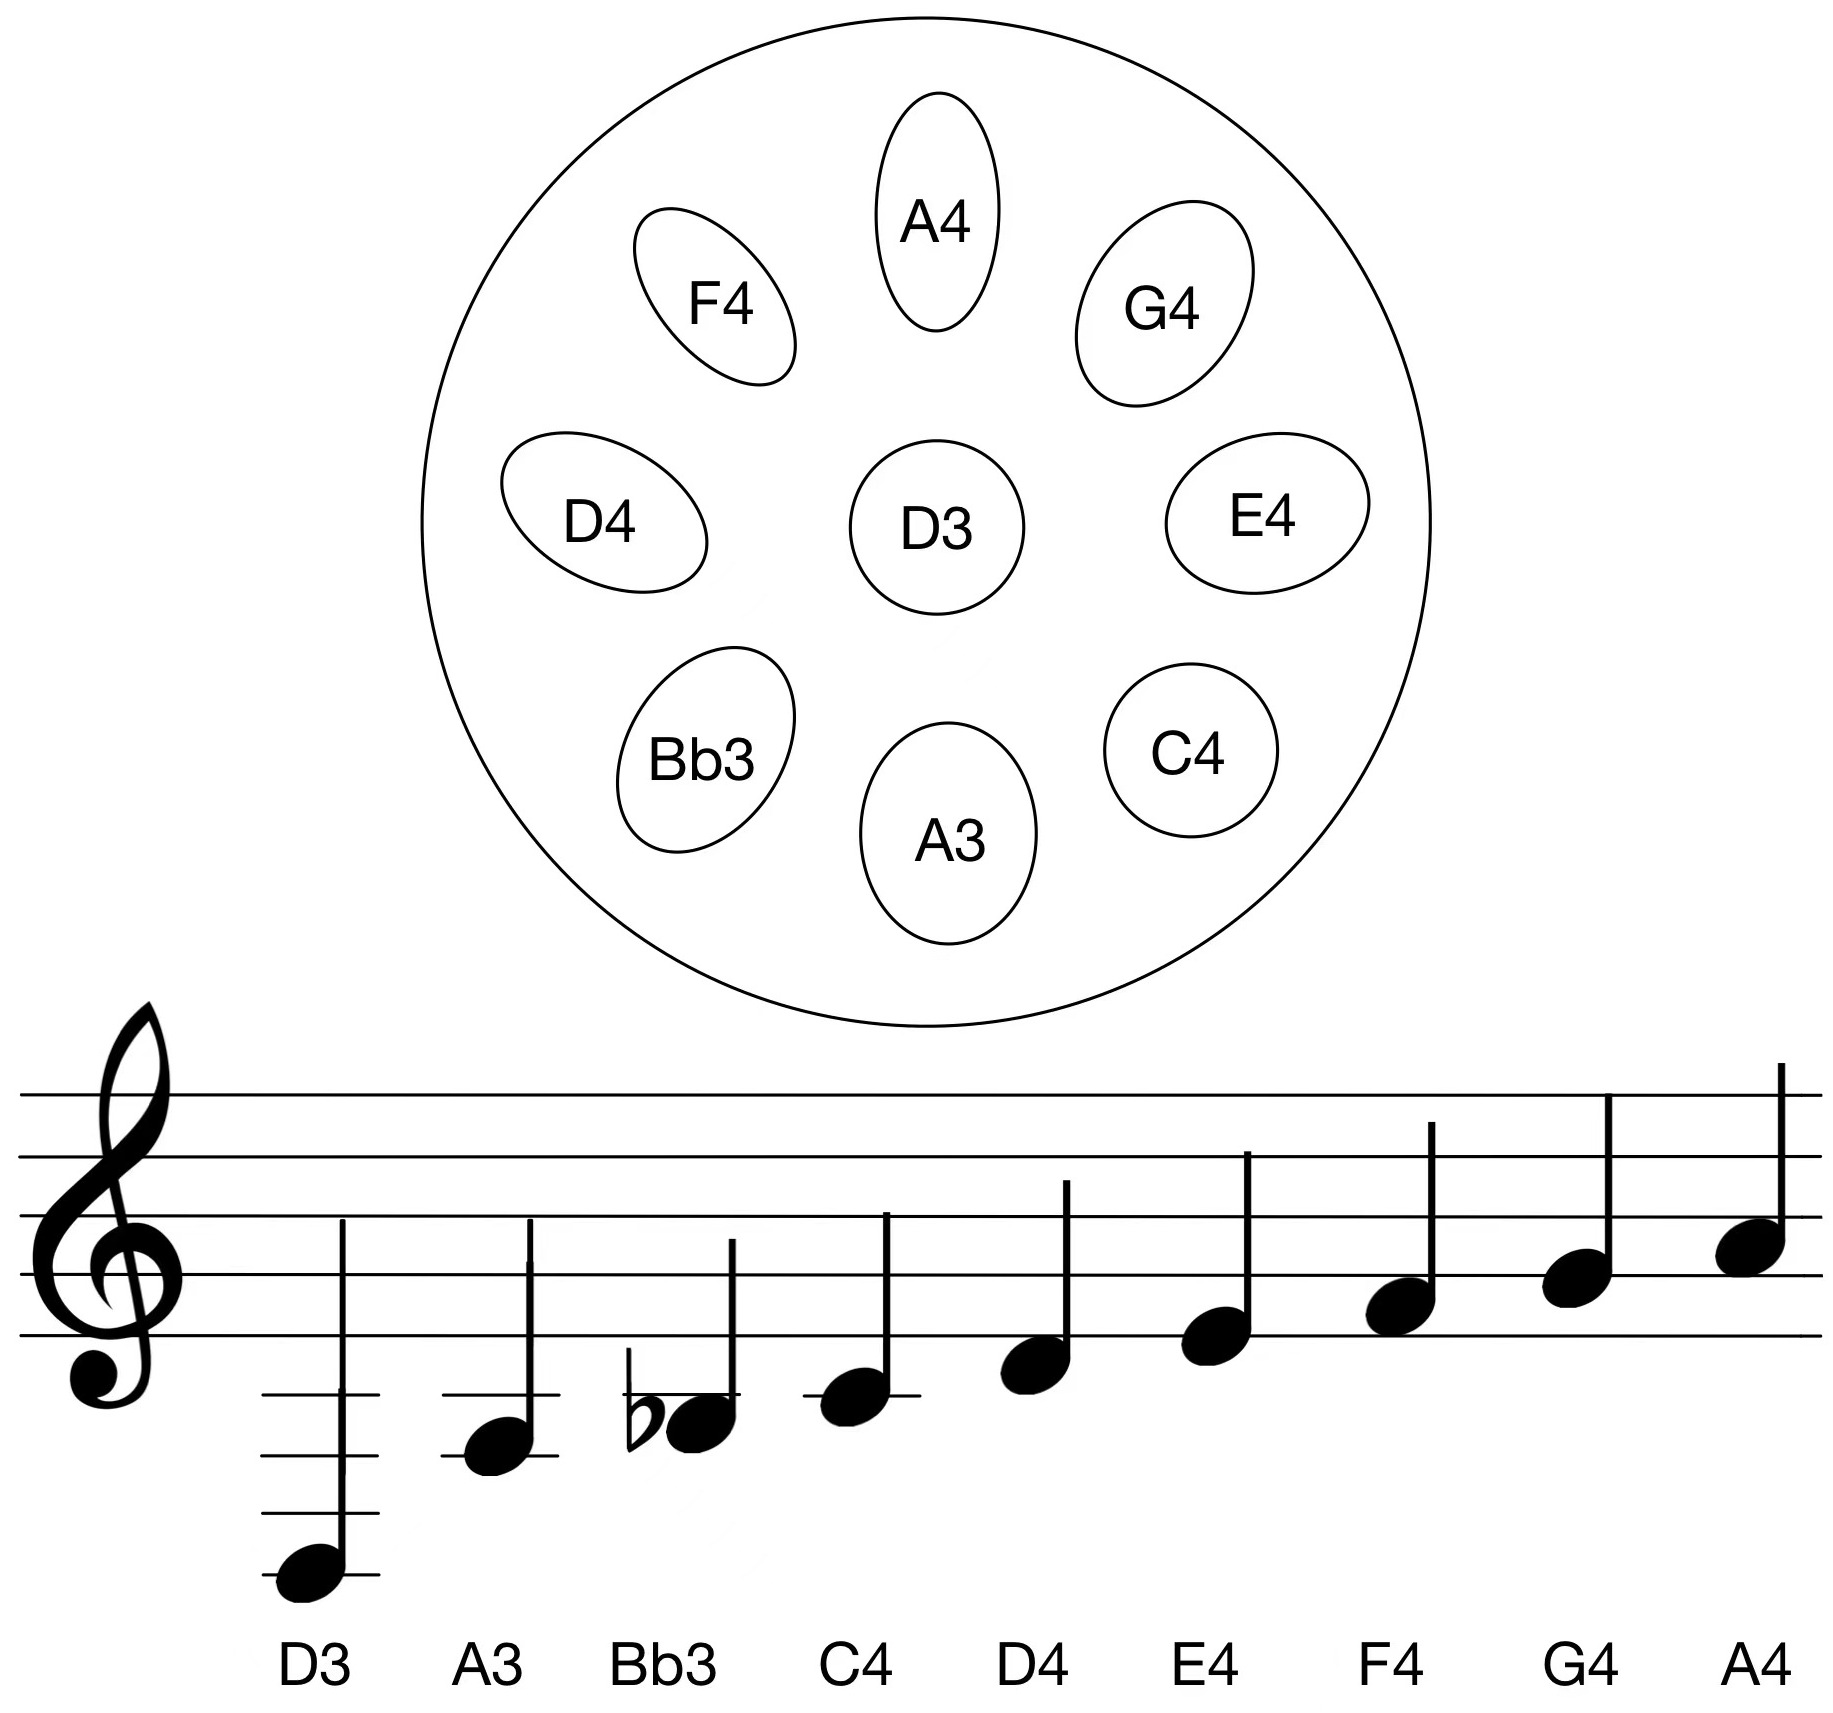 Figure 4. A sample tuning scale beginning with D3 note in the center.